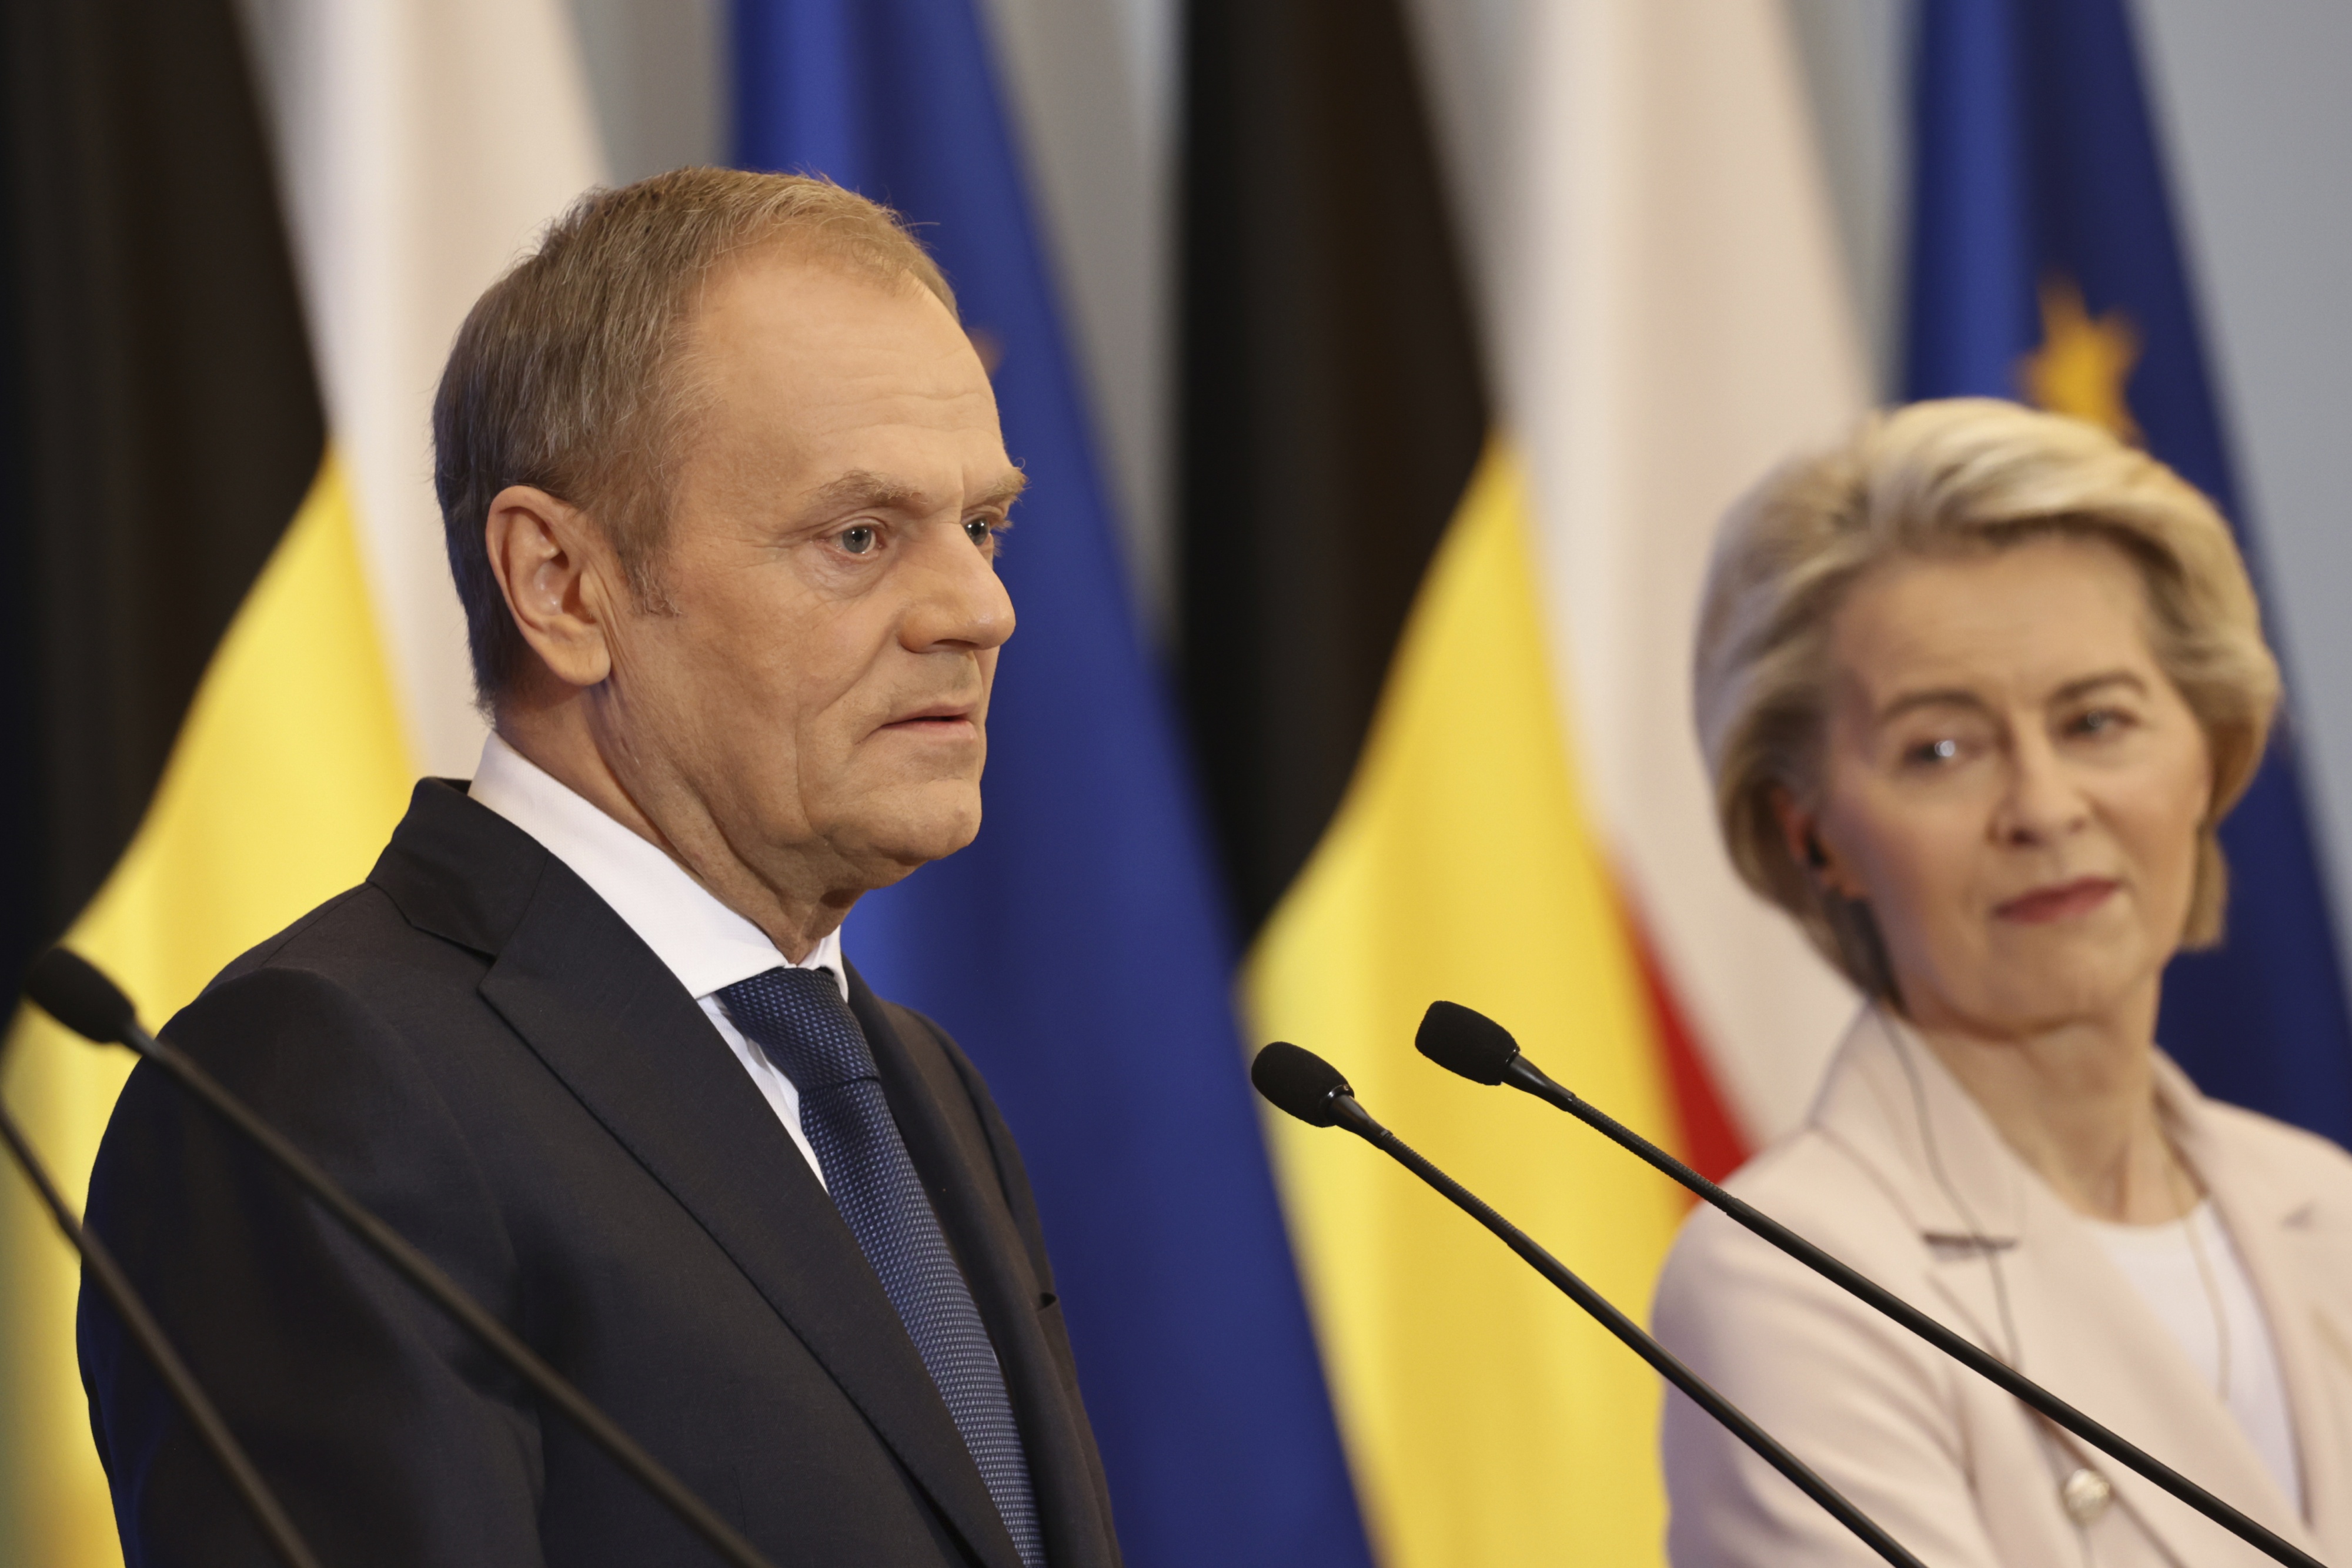 Prime Minister of Poland Donald Tusk and President of the European Commission Ursula von der Leyen during press conference after their meeting in Warsaw, Poland, February 23, 2024.